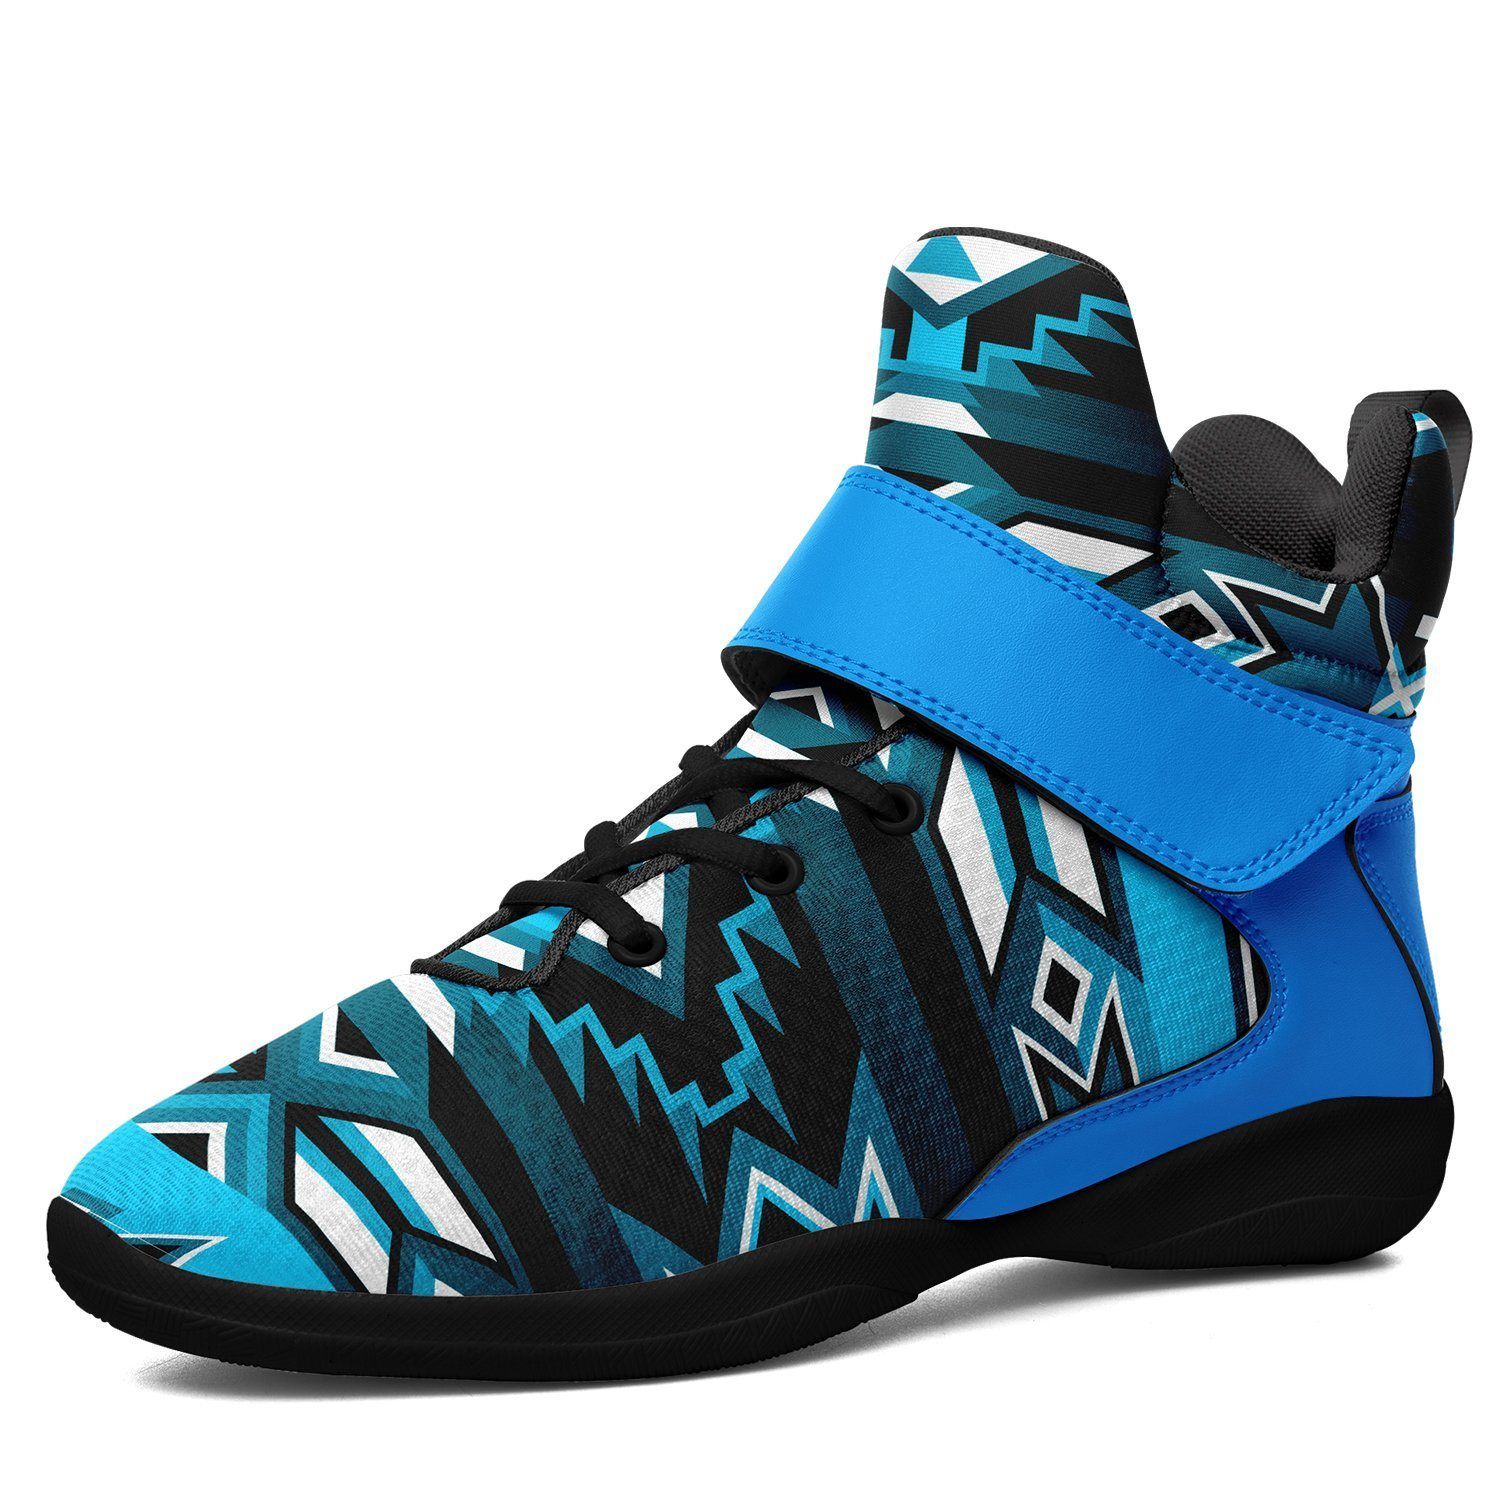 Northern Journey Kid's Ipottaa Basketball / Sport High Top Shoes 49 Dzine US Child 12.5/ EUR 30 Black Sole with Light Blue Strap 